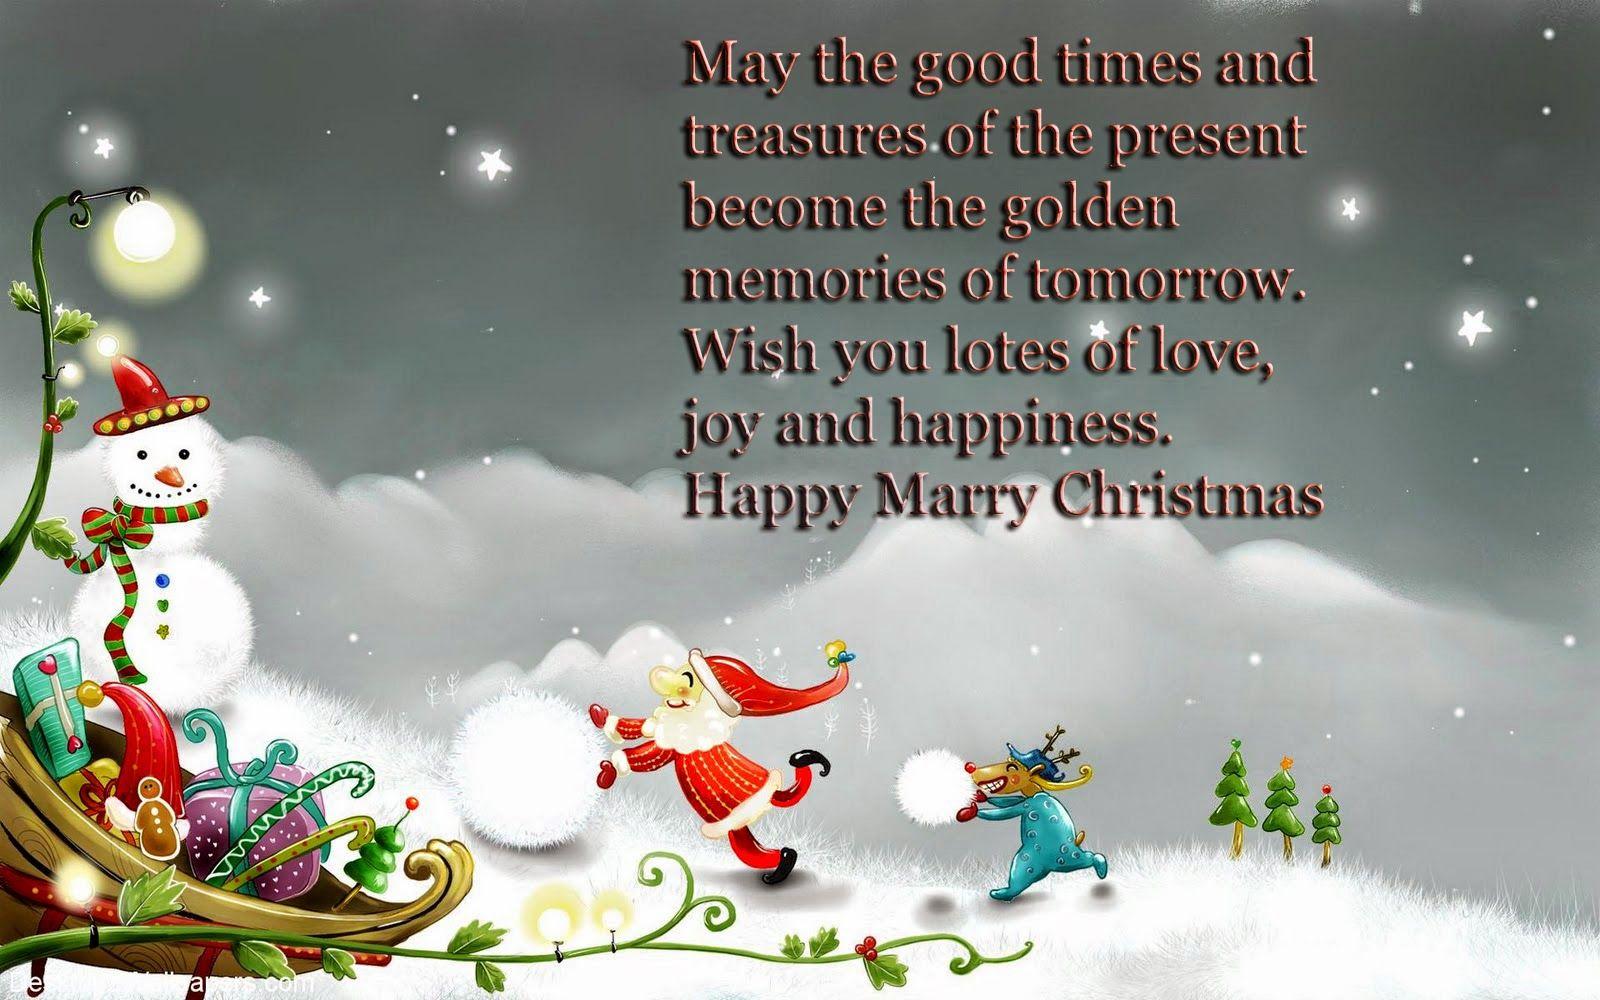 Merry Christmas 2014 greetings message SMS, Wishes, Quotes World